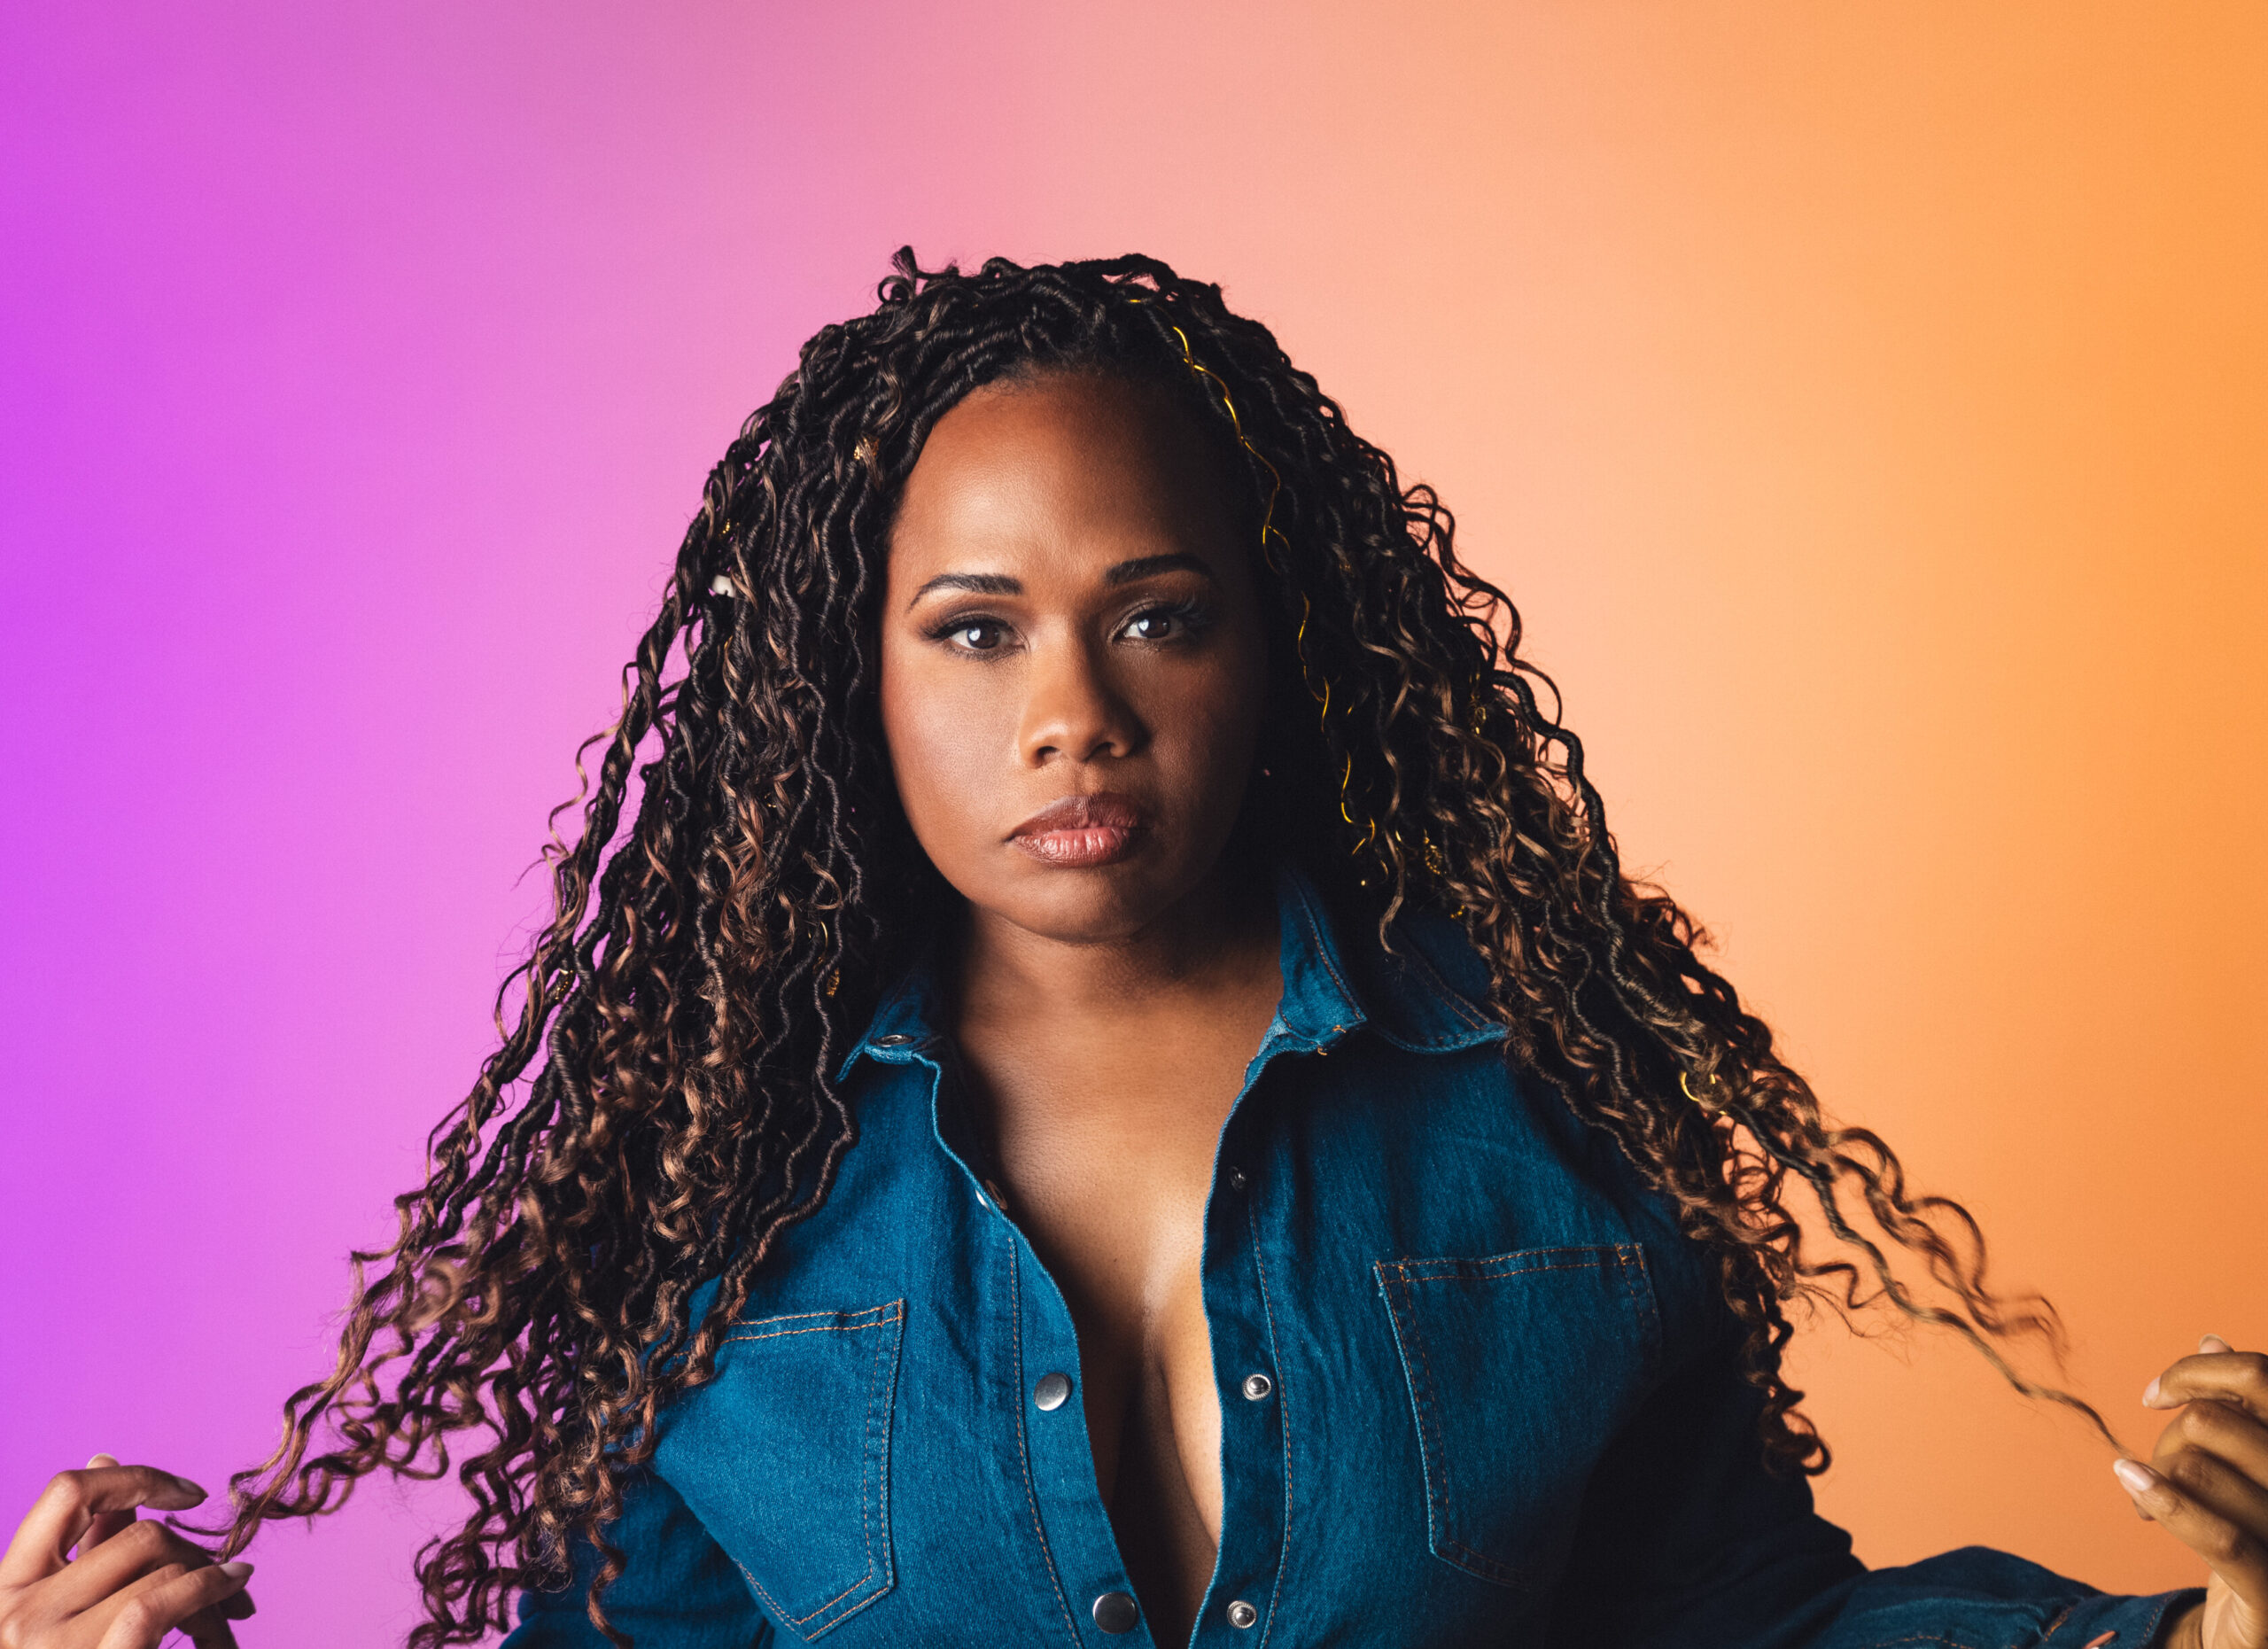 Adrianna Freeman Releases New Single "I Ran Out of Whiskey Yesterday"